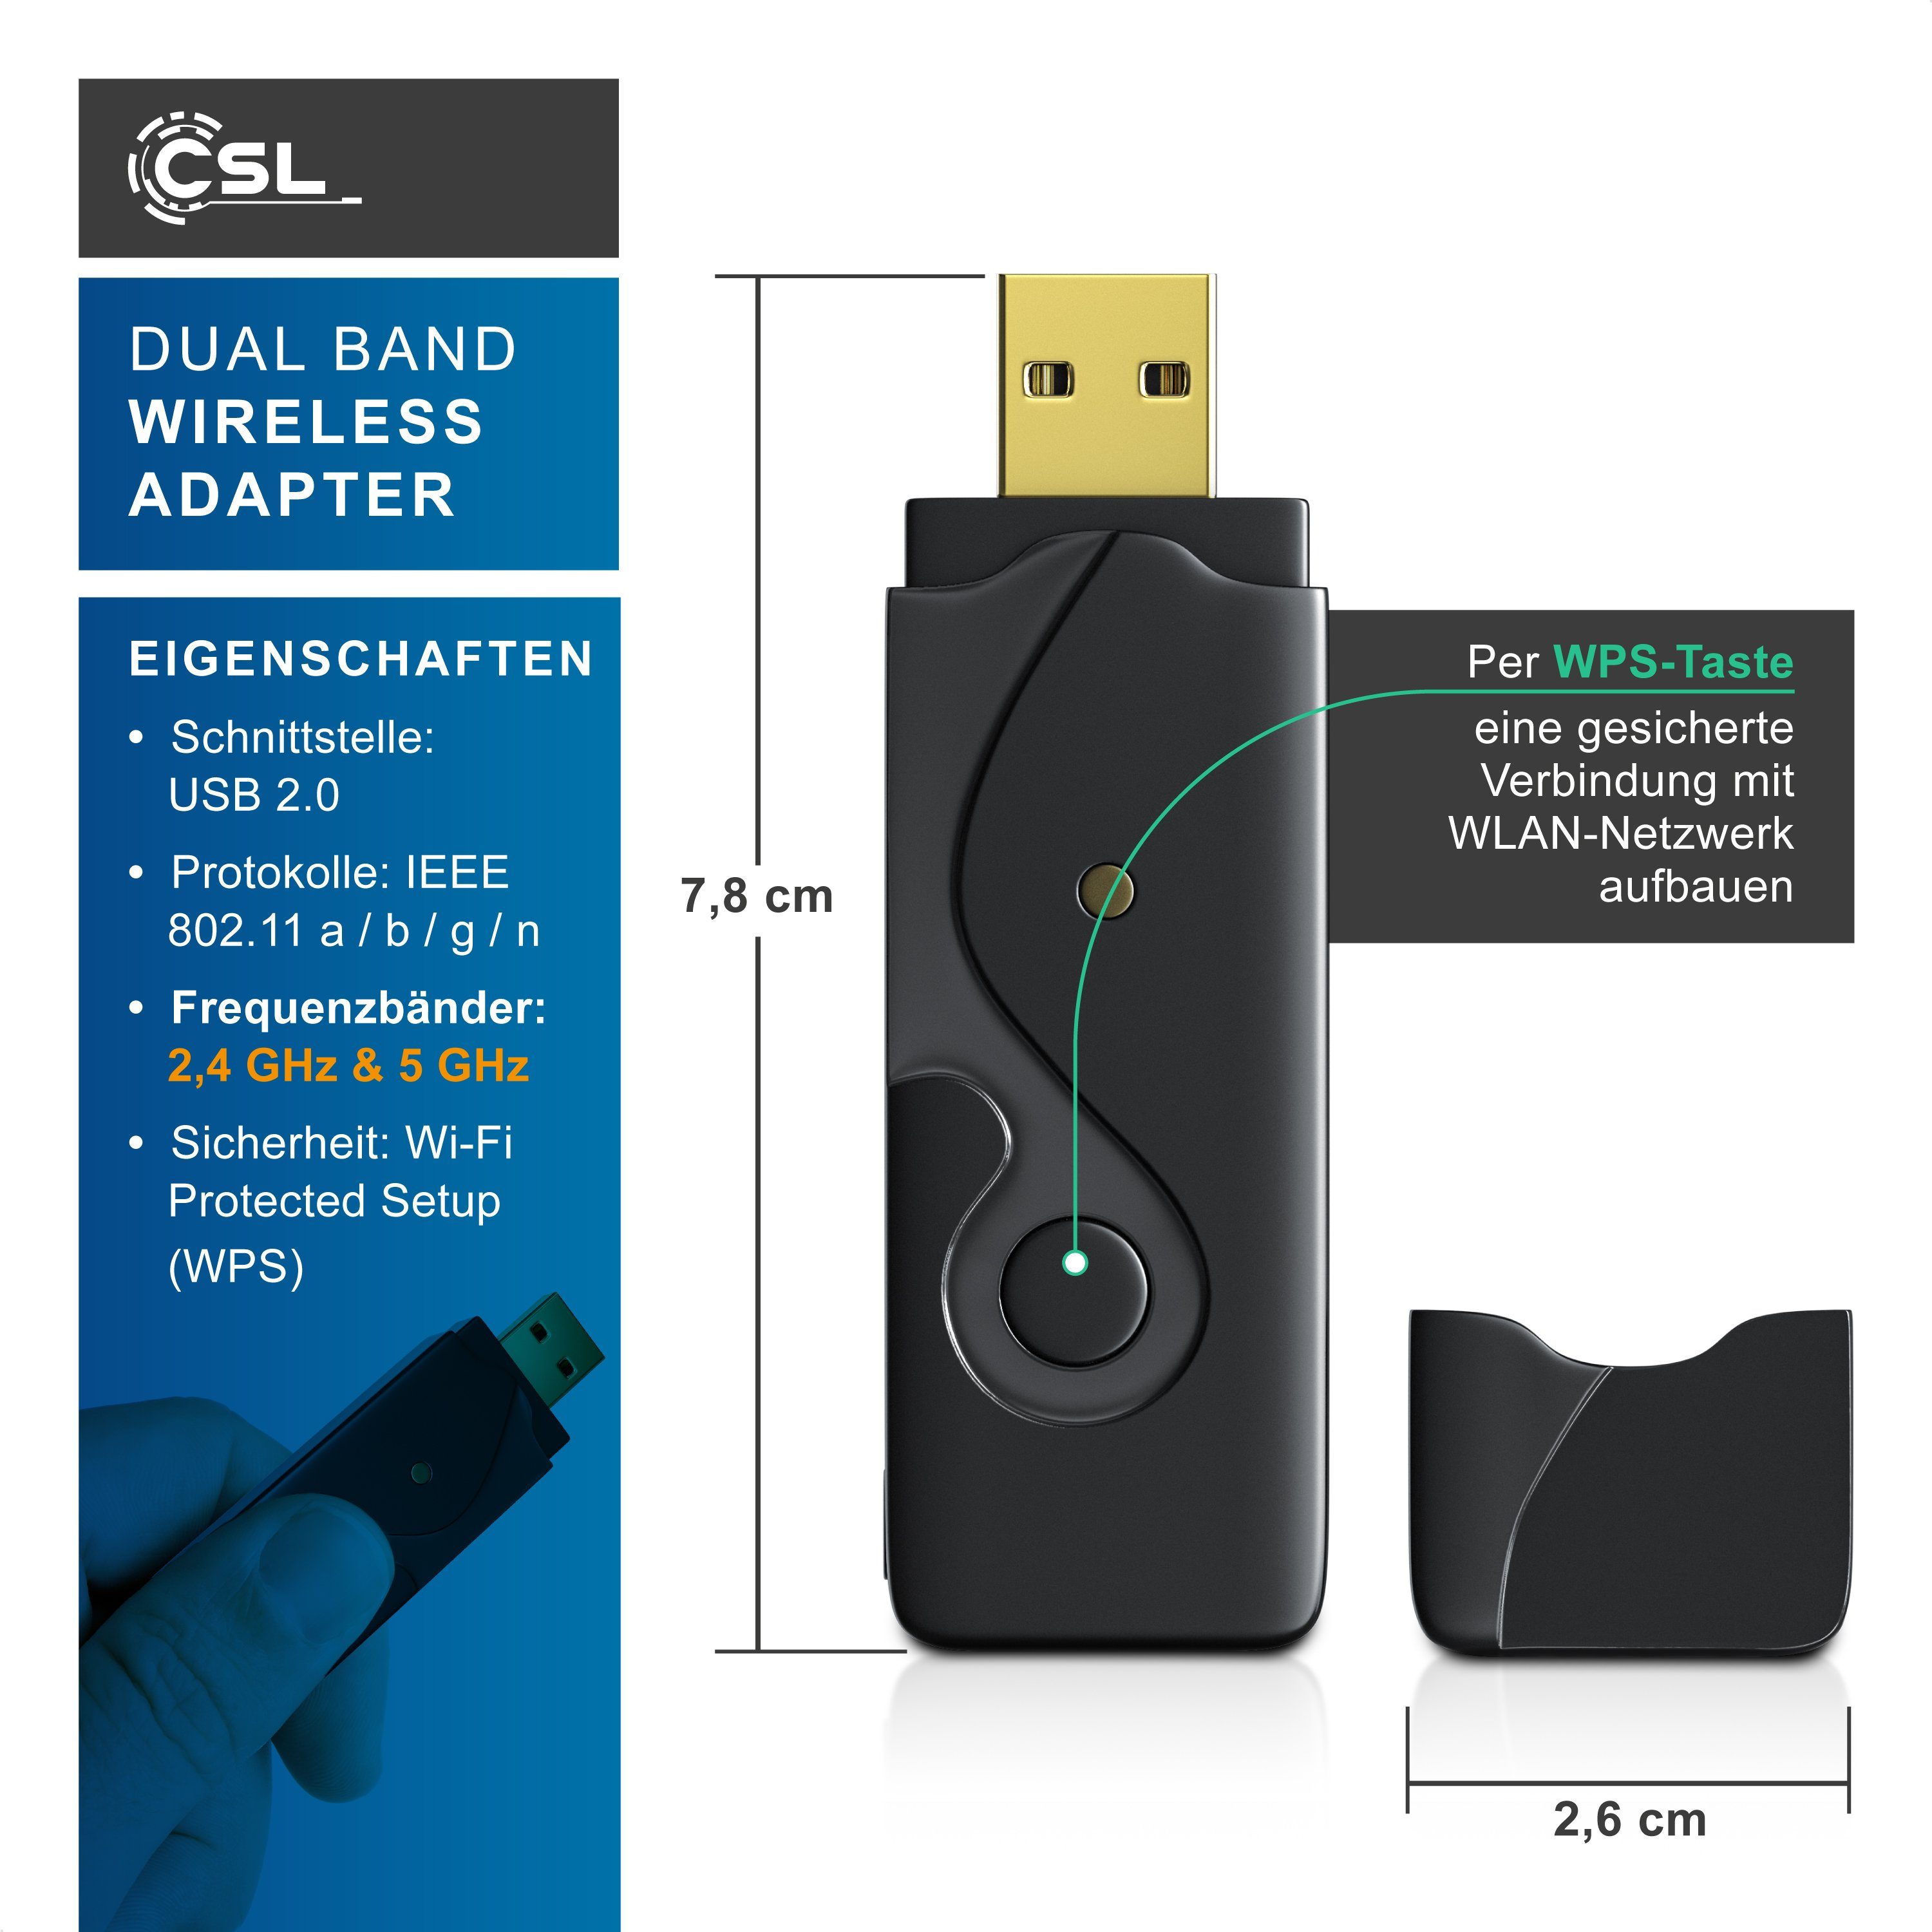 WLAN-Dongle, 300 2,4GHz 600 Band 300 MBit/s 5GHz WiFi Adapter, Aplic Mbps Dual Mbps Stick